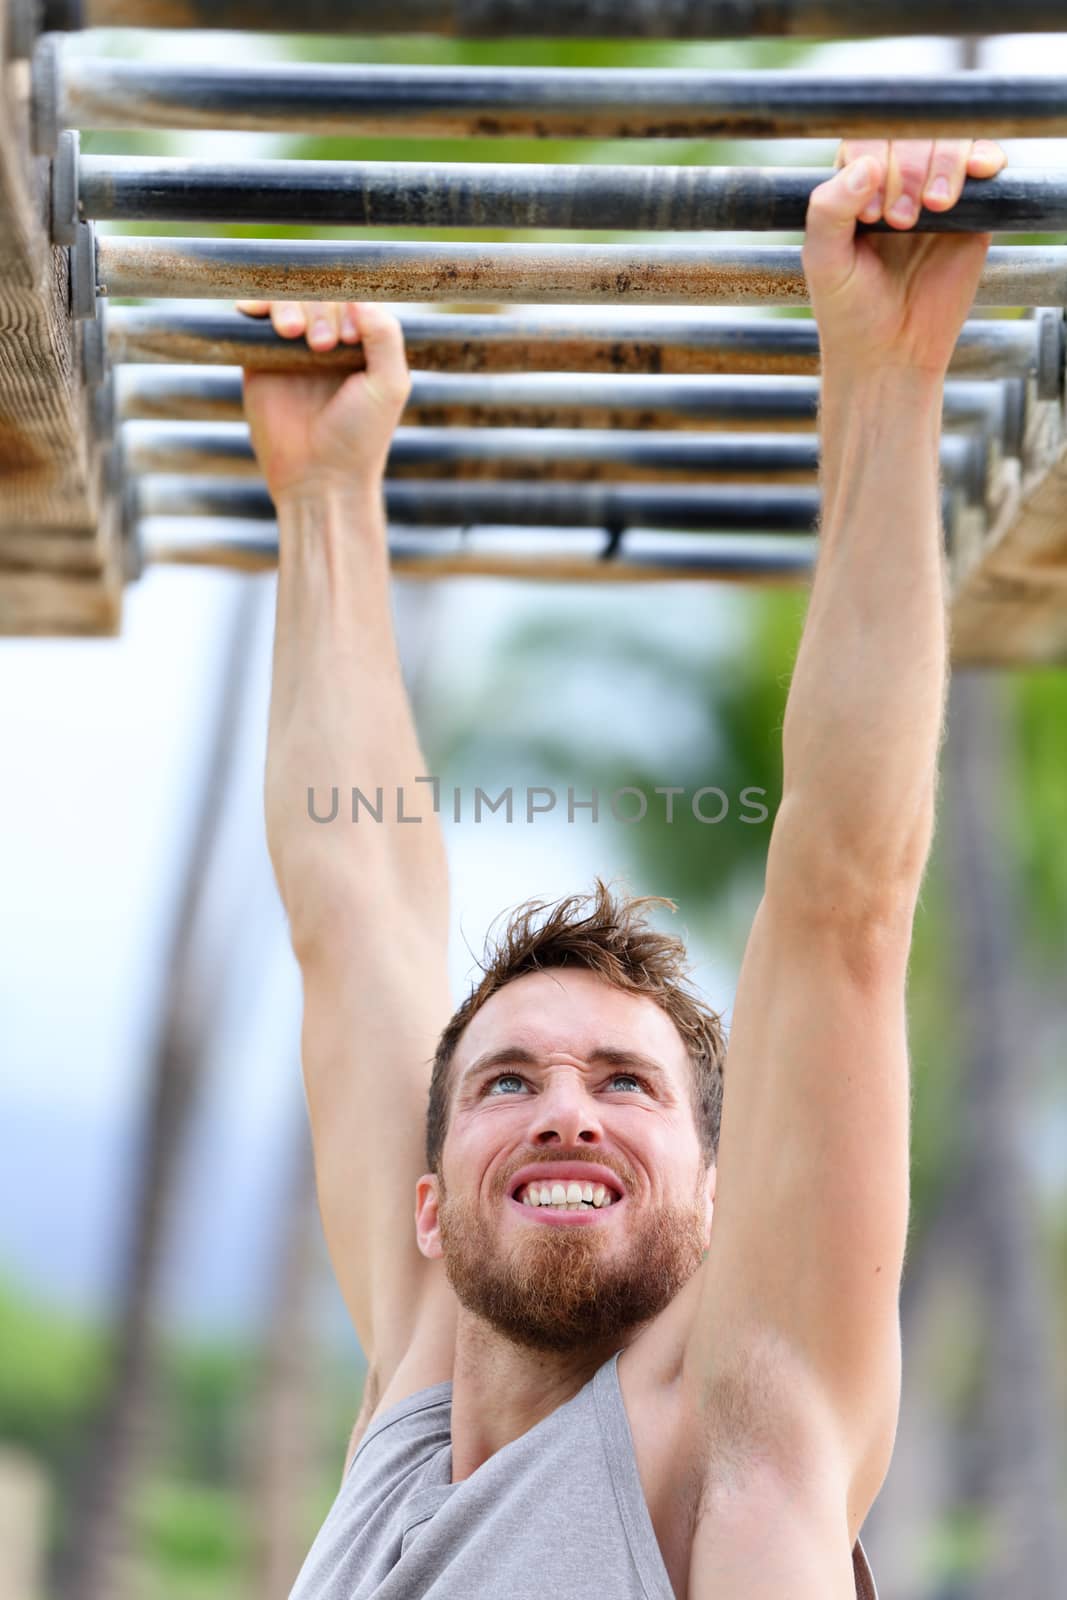 Fit man cross training on monkey bars station. Fitness workout on brachiation ladder in an outdoor gym outside. Male athlete swinging on high bars exercising.